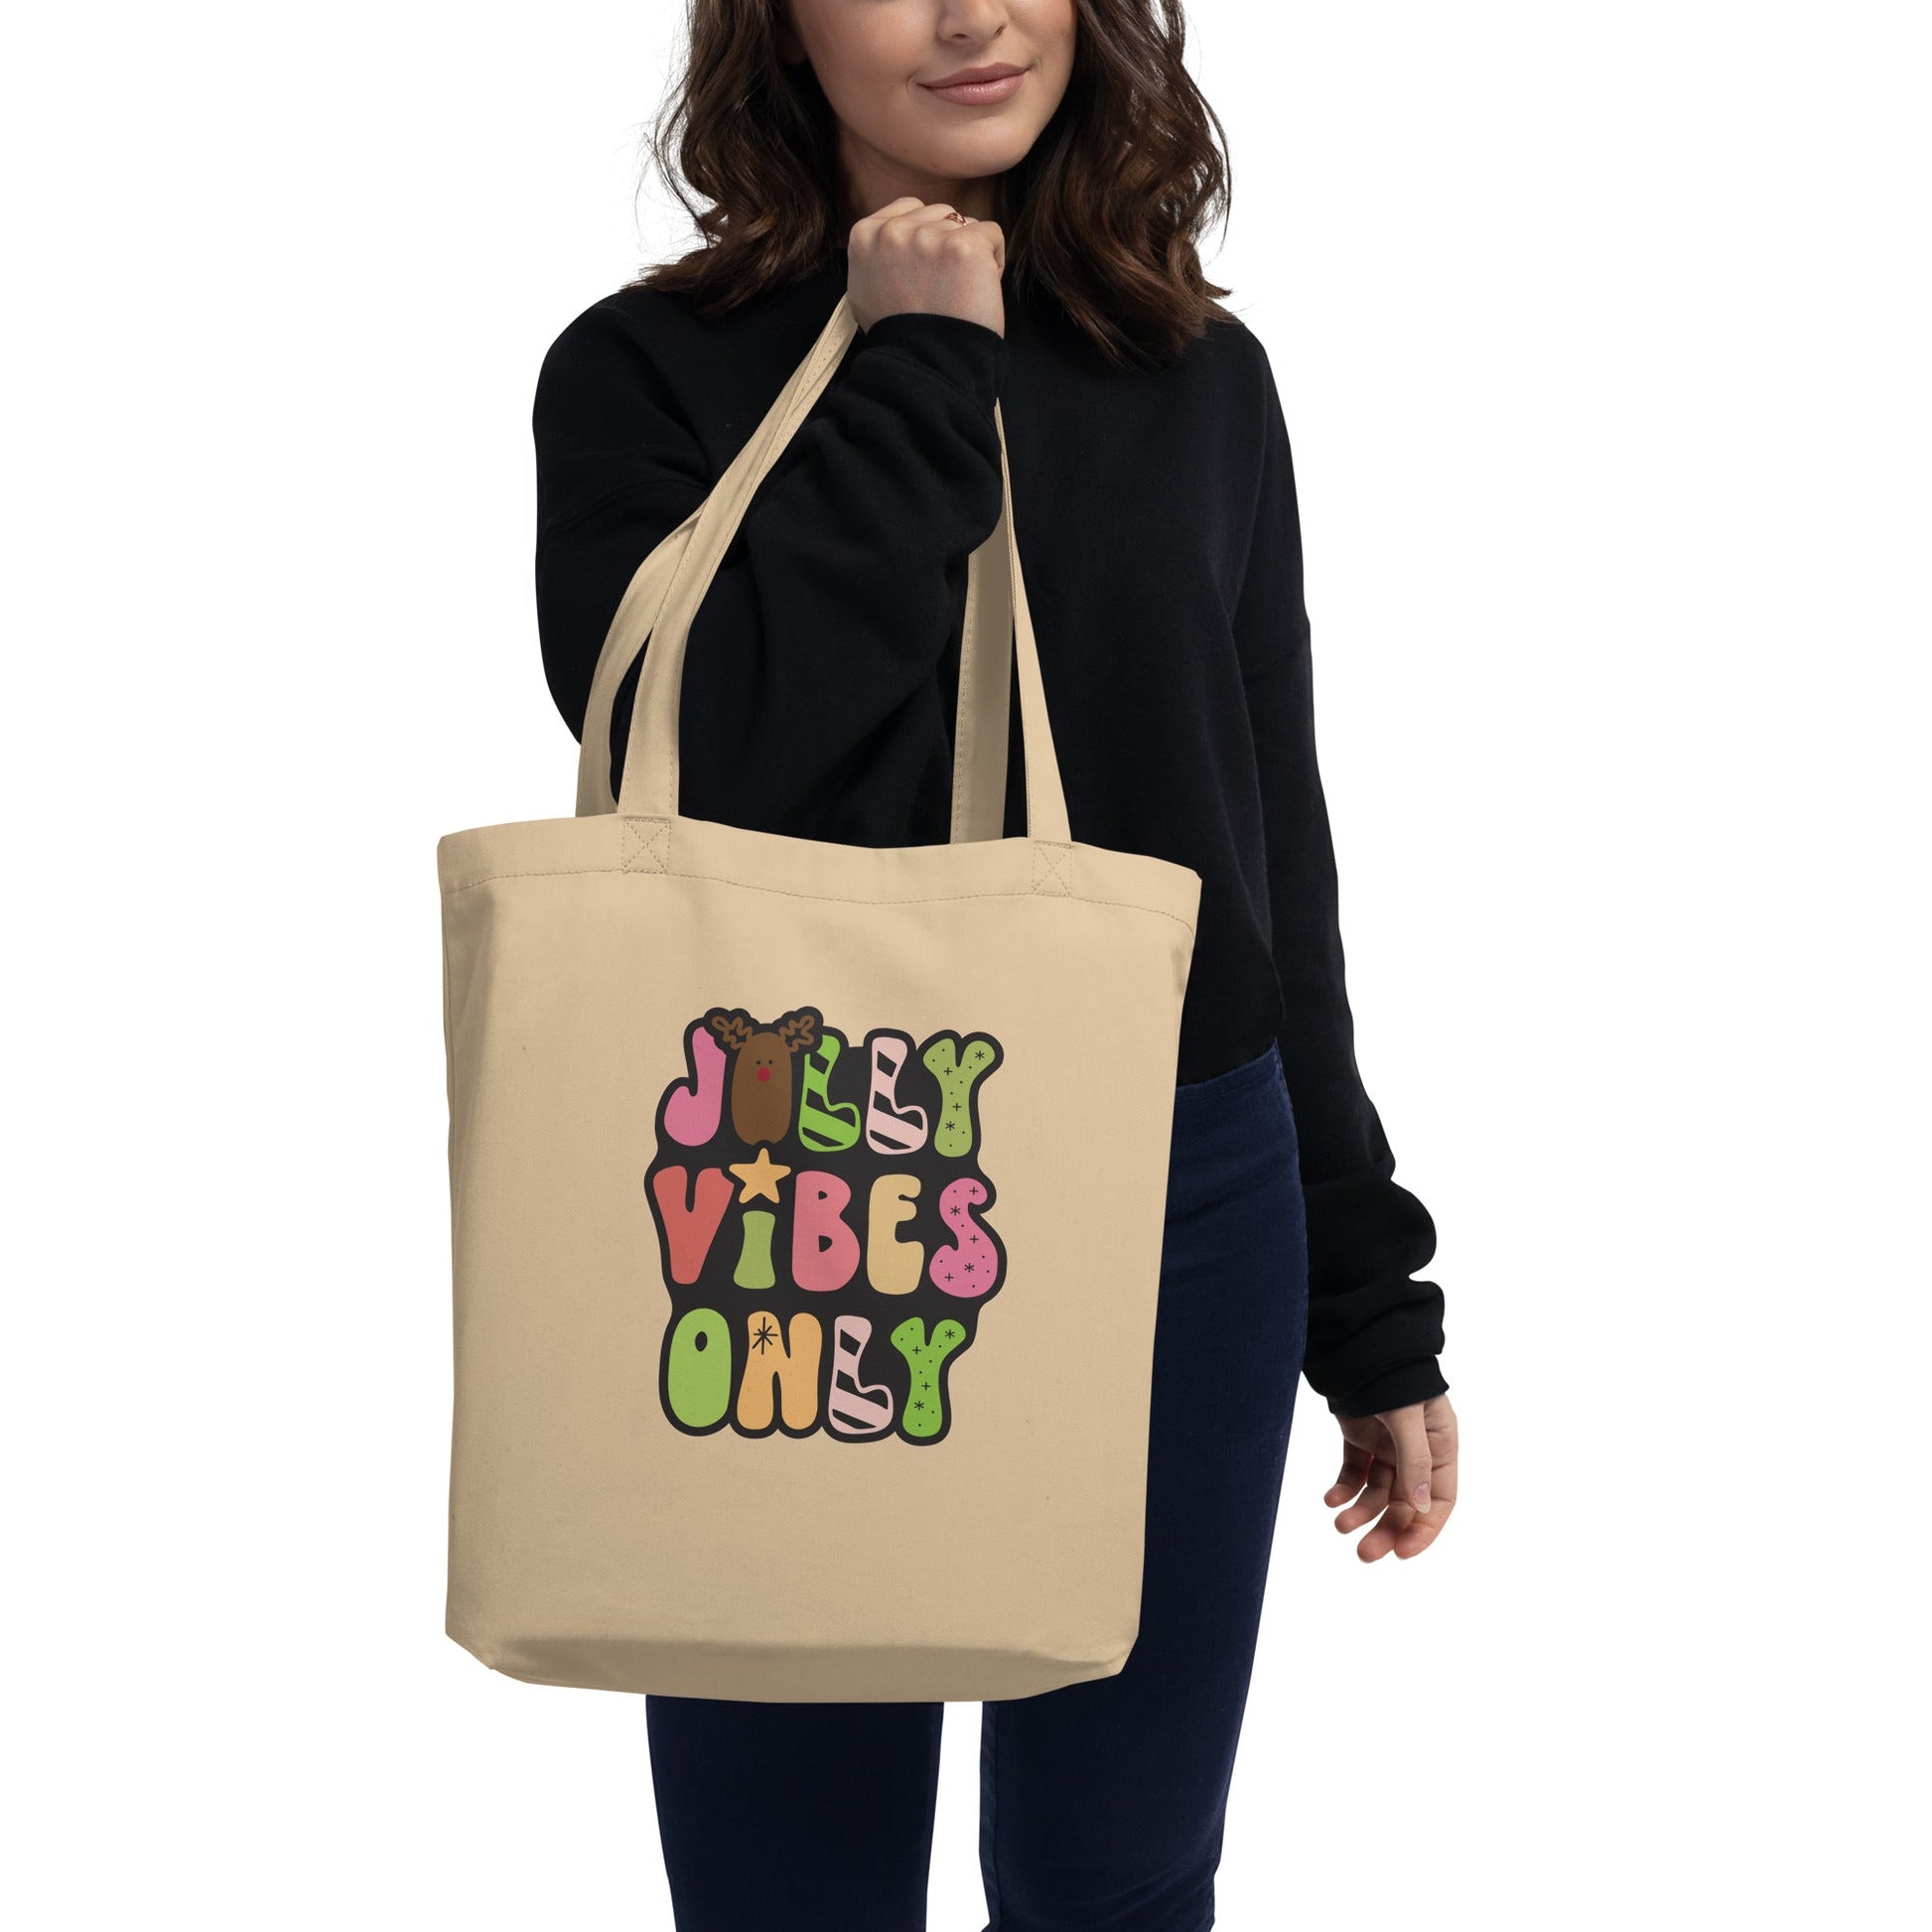 Jolly Vibes Only Christmas Eco Tote Bag Salmon Olive Oyster 